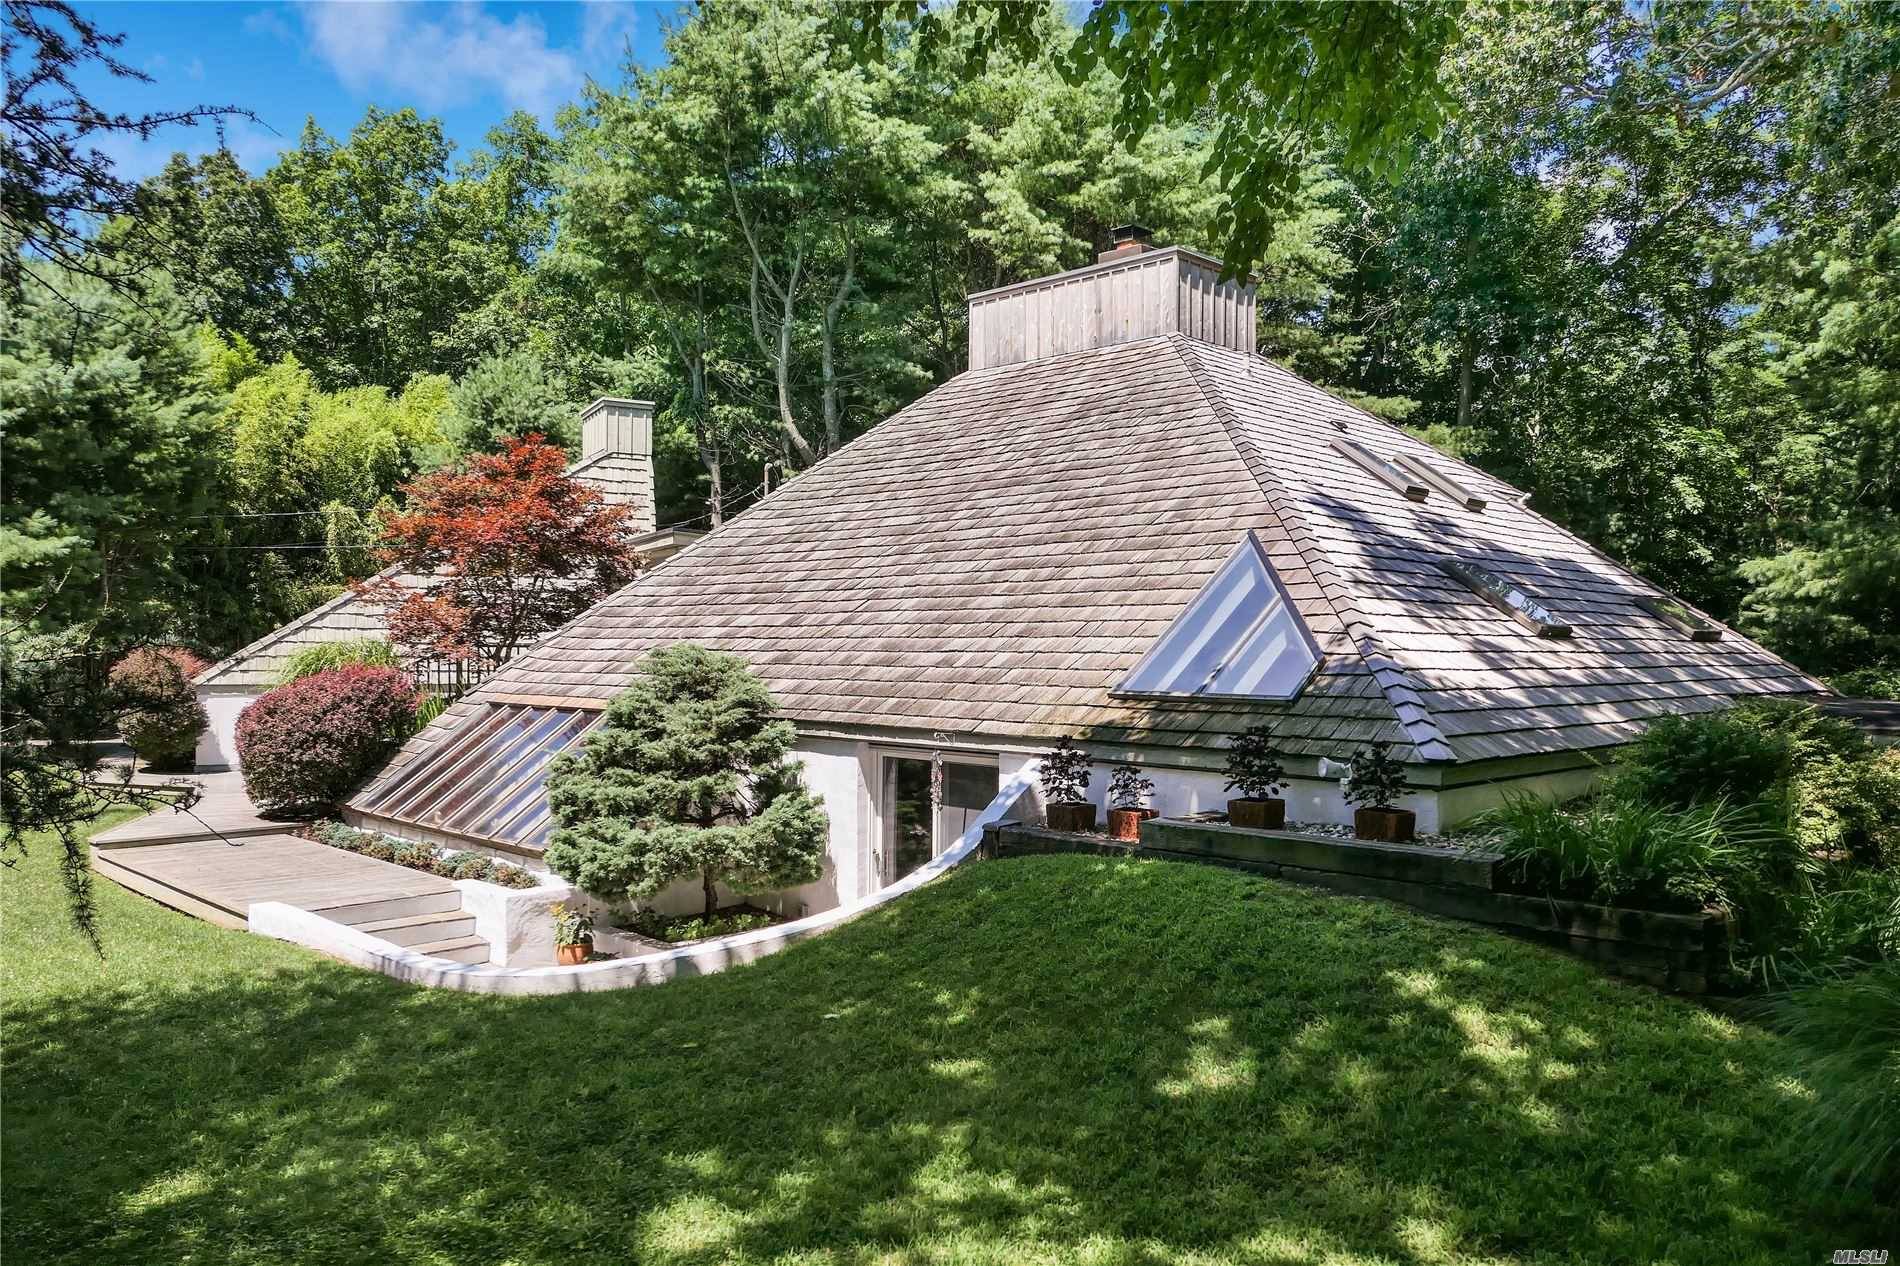 Tucked down a long driveway for ultimate privacy, this special home blends gently into its 1.